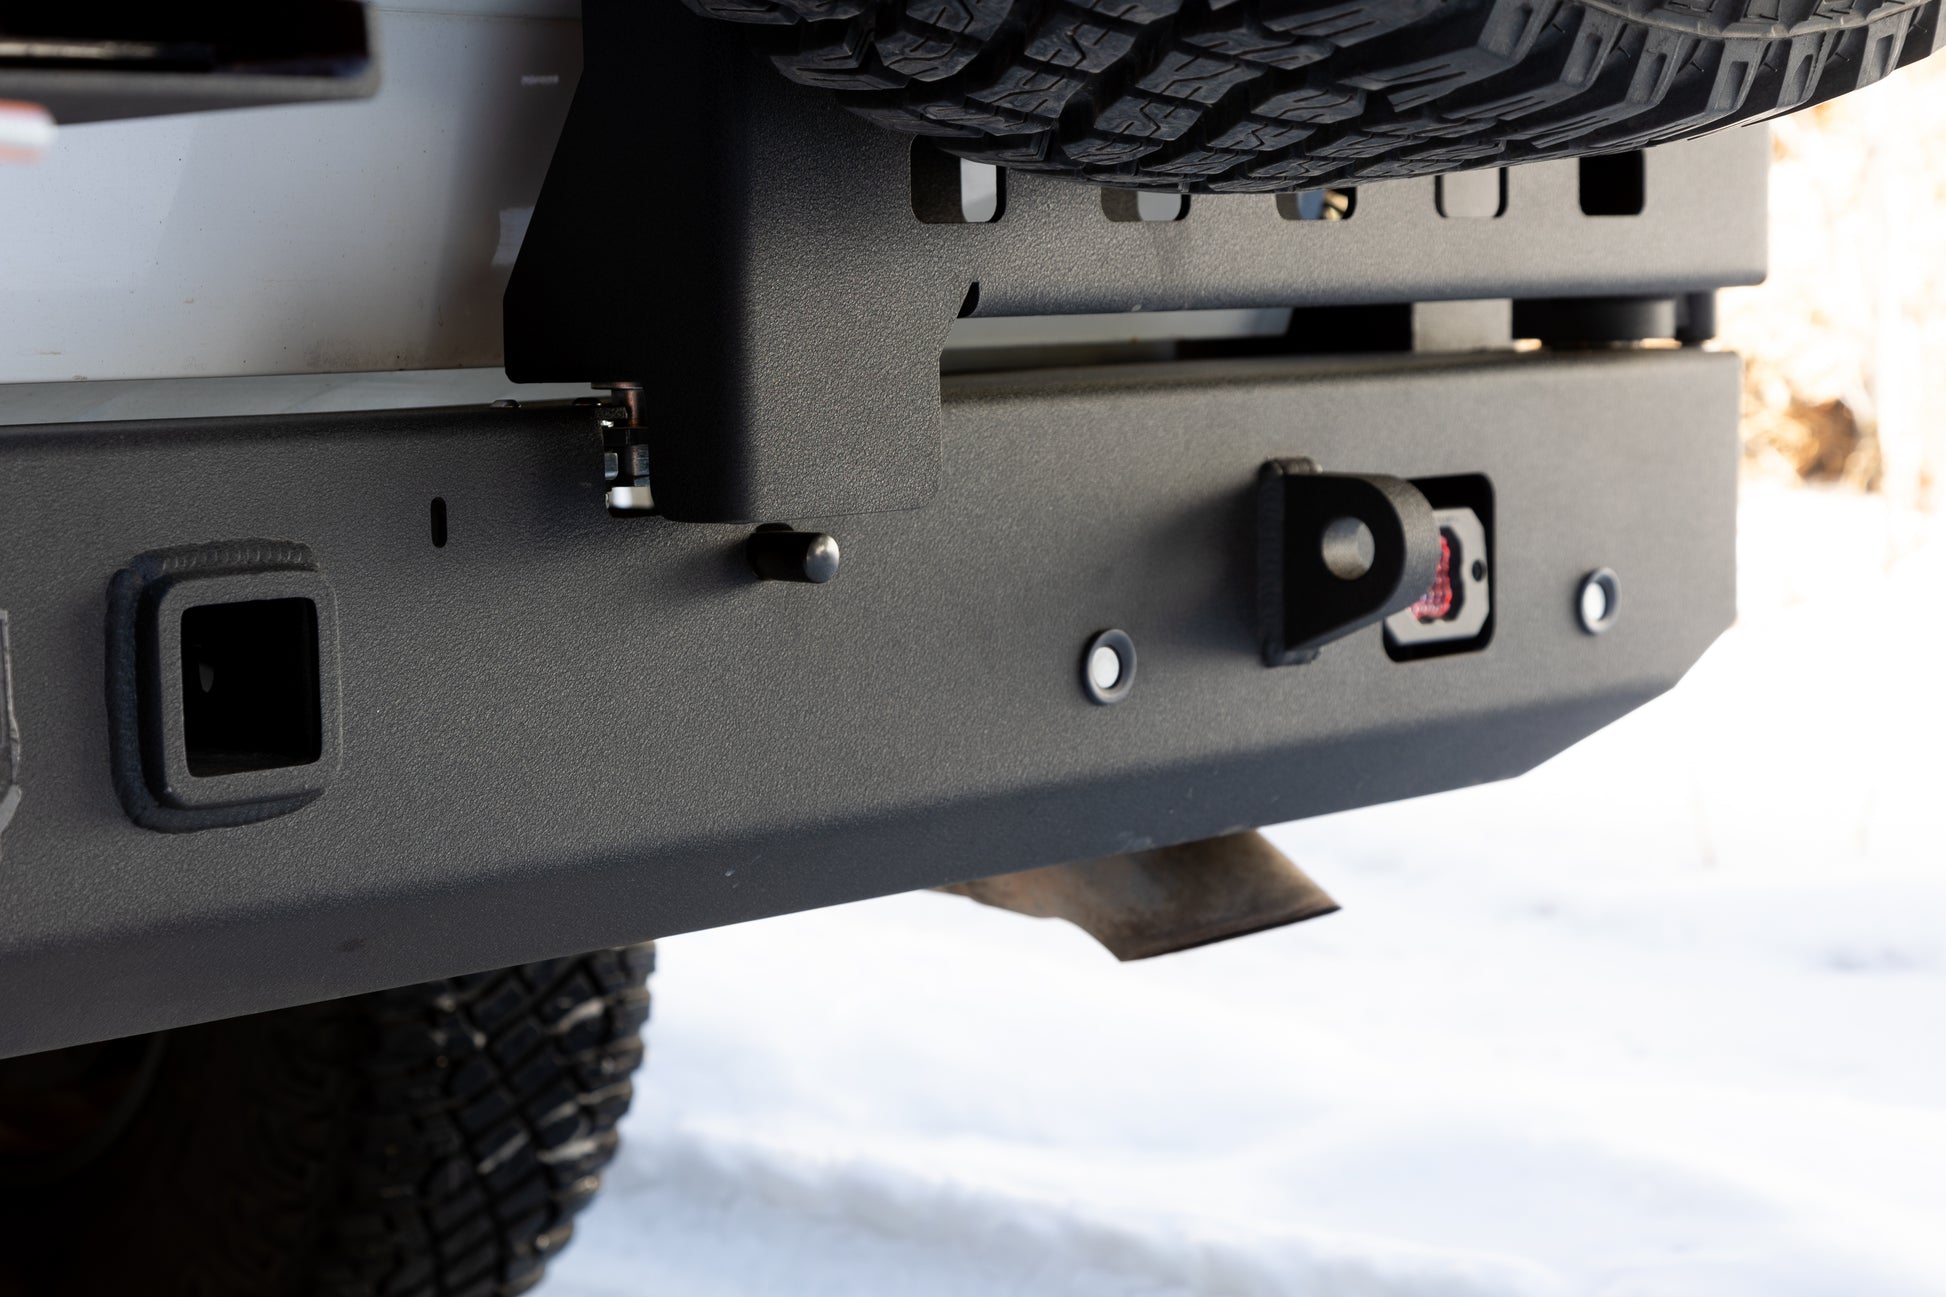 2015-2020 Chevy Suburban Dual Rear Swing Out Bumper Baseline Overland Yukon XL by Chassis Unlimited